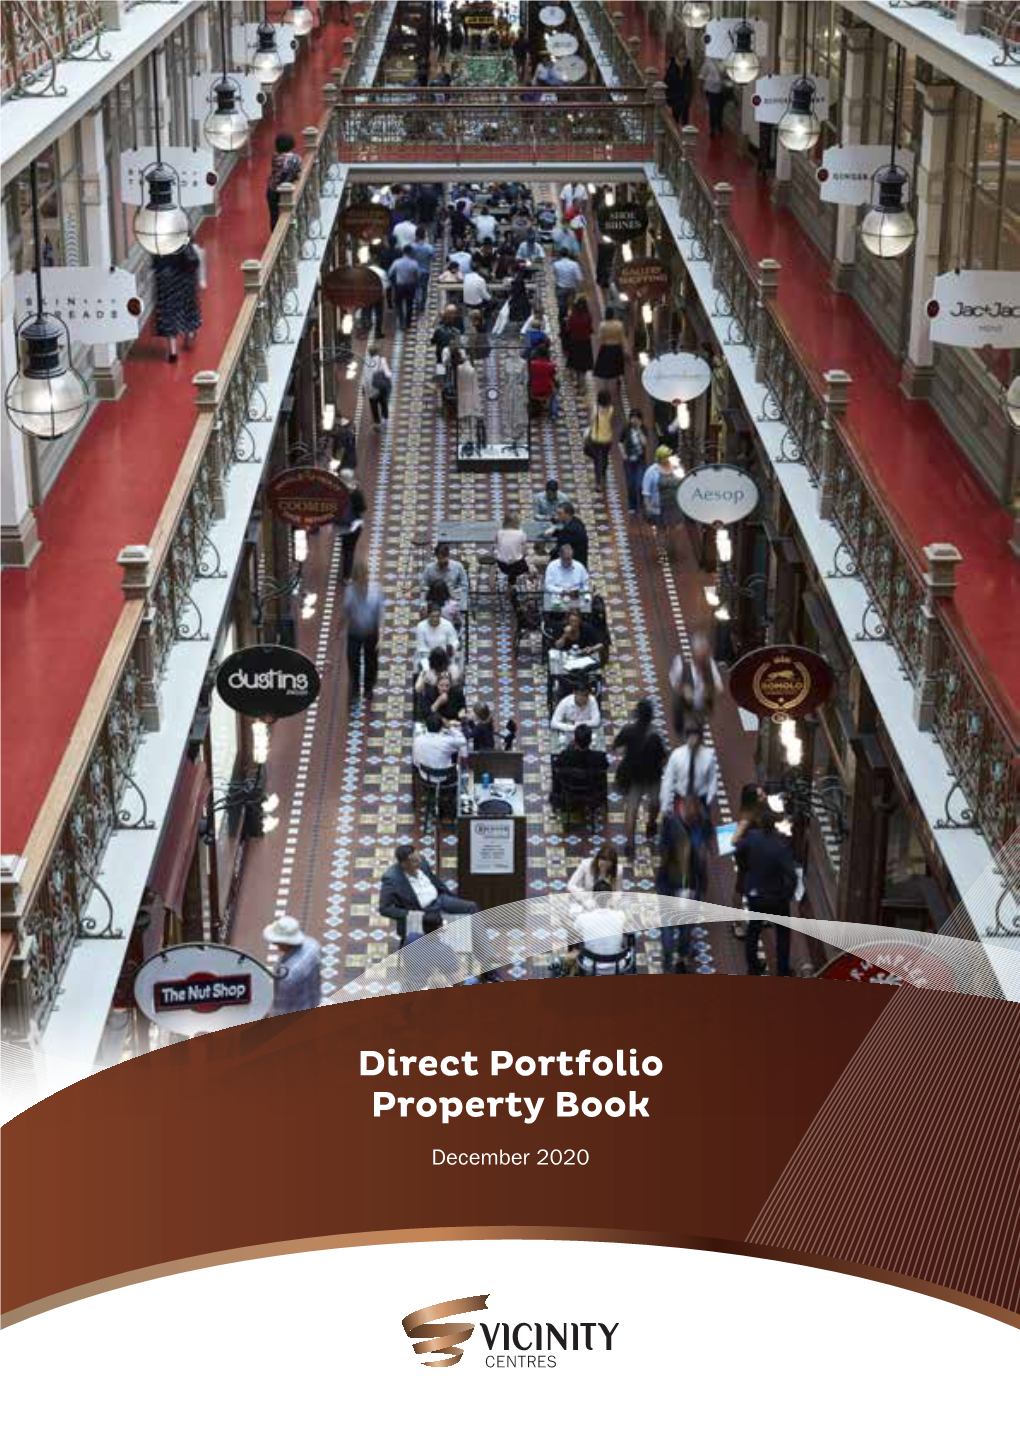 Direct Portfolio Property Book December 2020 Contents Our Centres Play an Essential Role and We Take This Responsibility